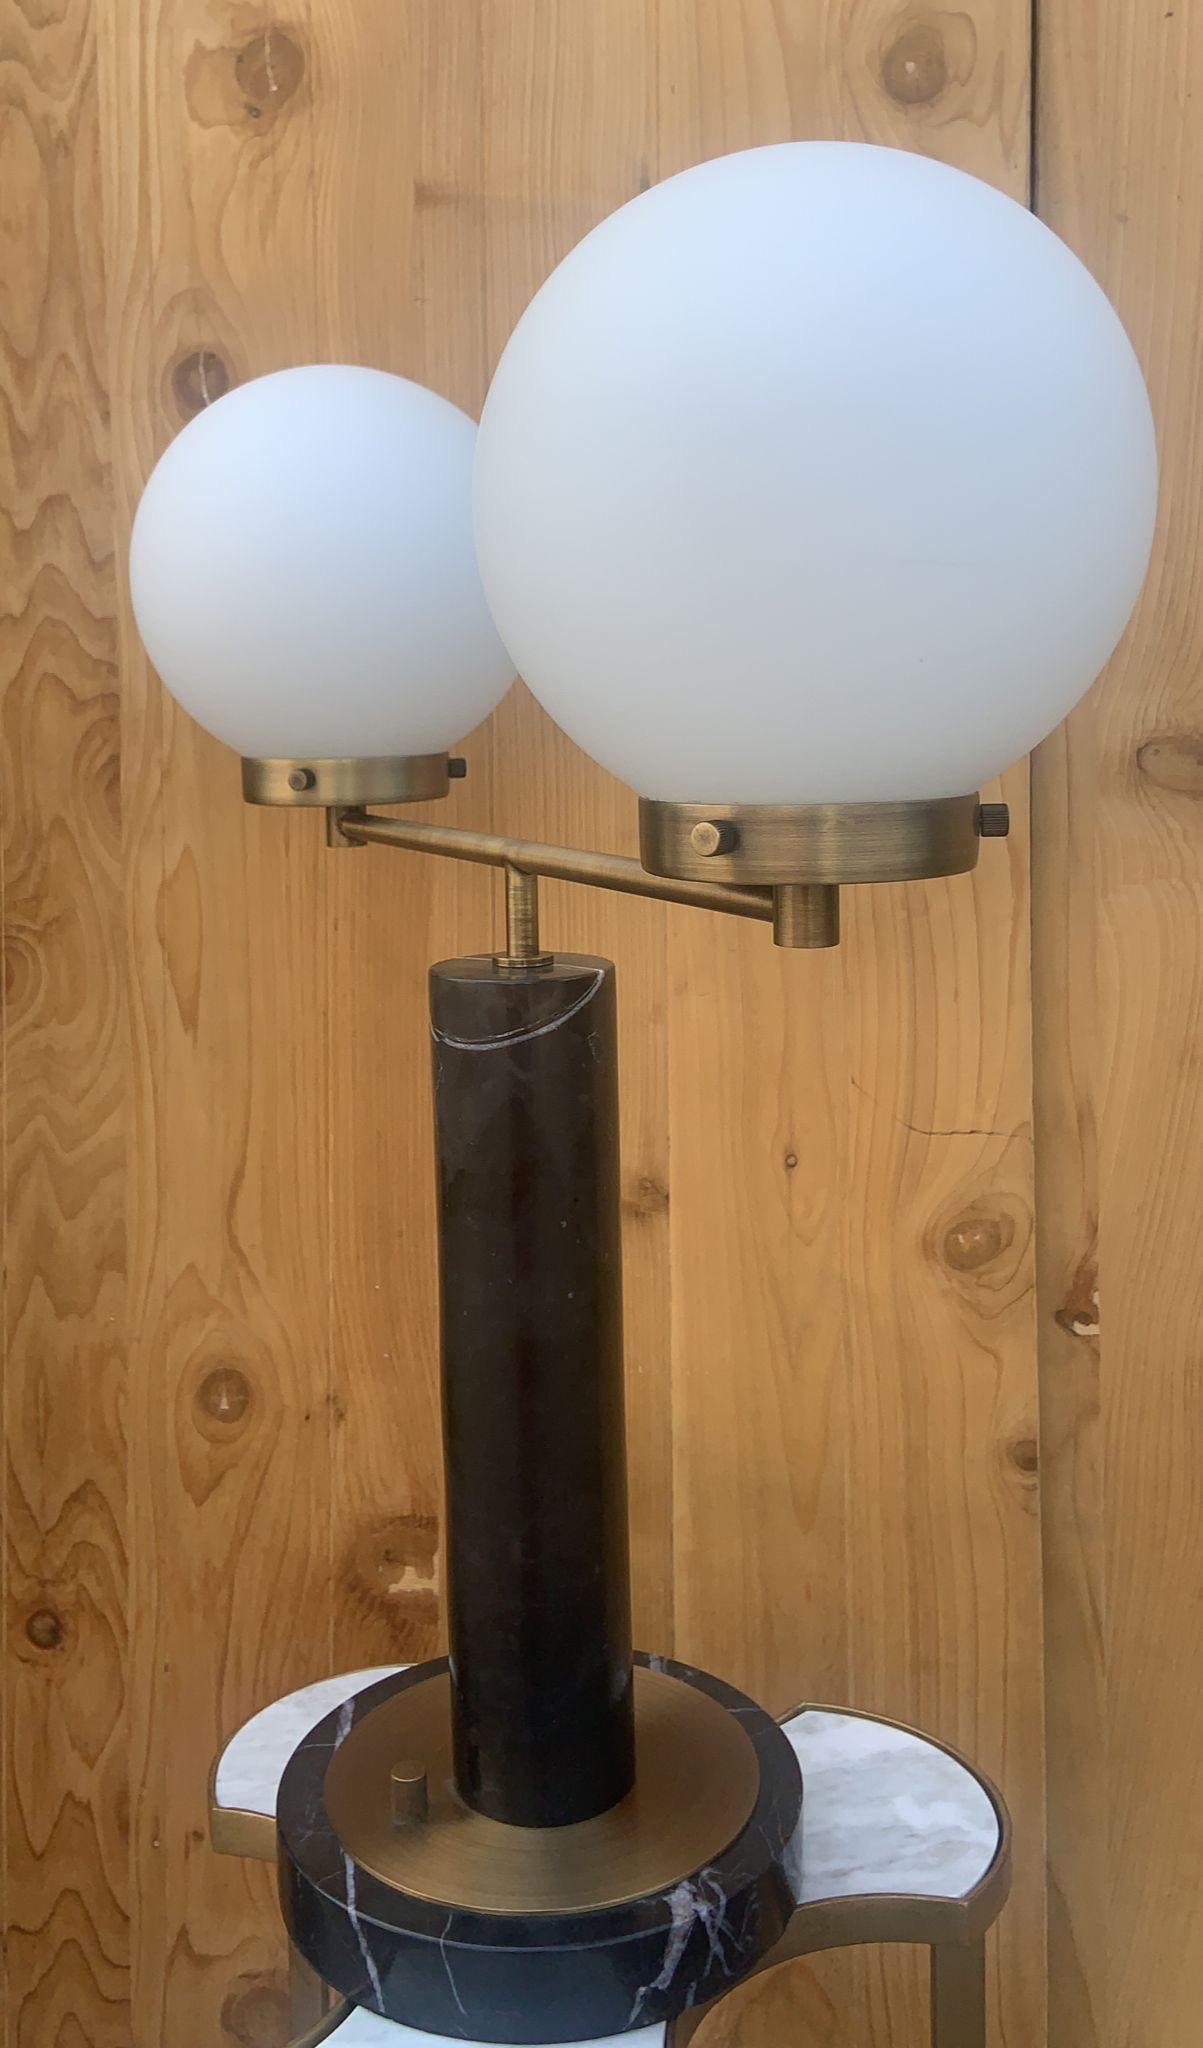 Modern Marble and Brass Table Lamps with 2 White Ball Shades

The lamp heavy. Works great. We also have a matching lamp with 1 white ball shades. 

Circa 2018

Dimensions 

H 25” (top of the ball)
H 17” (top of the brass bar)
D 8.5” Base 
D 7